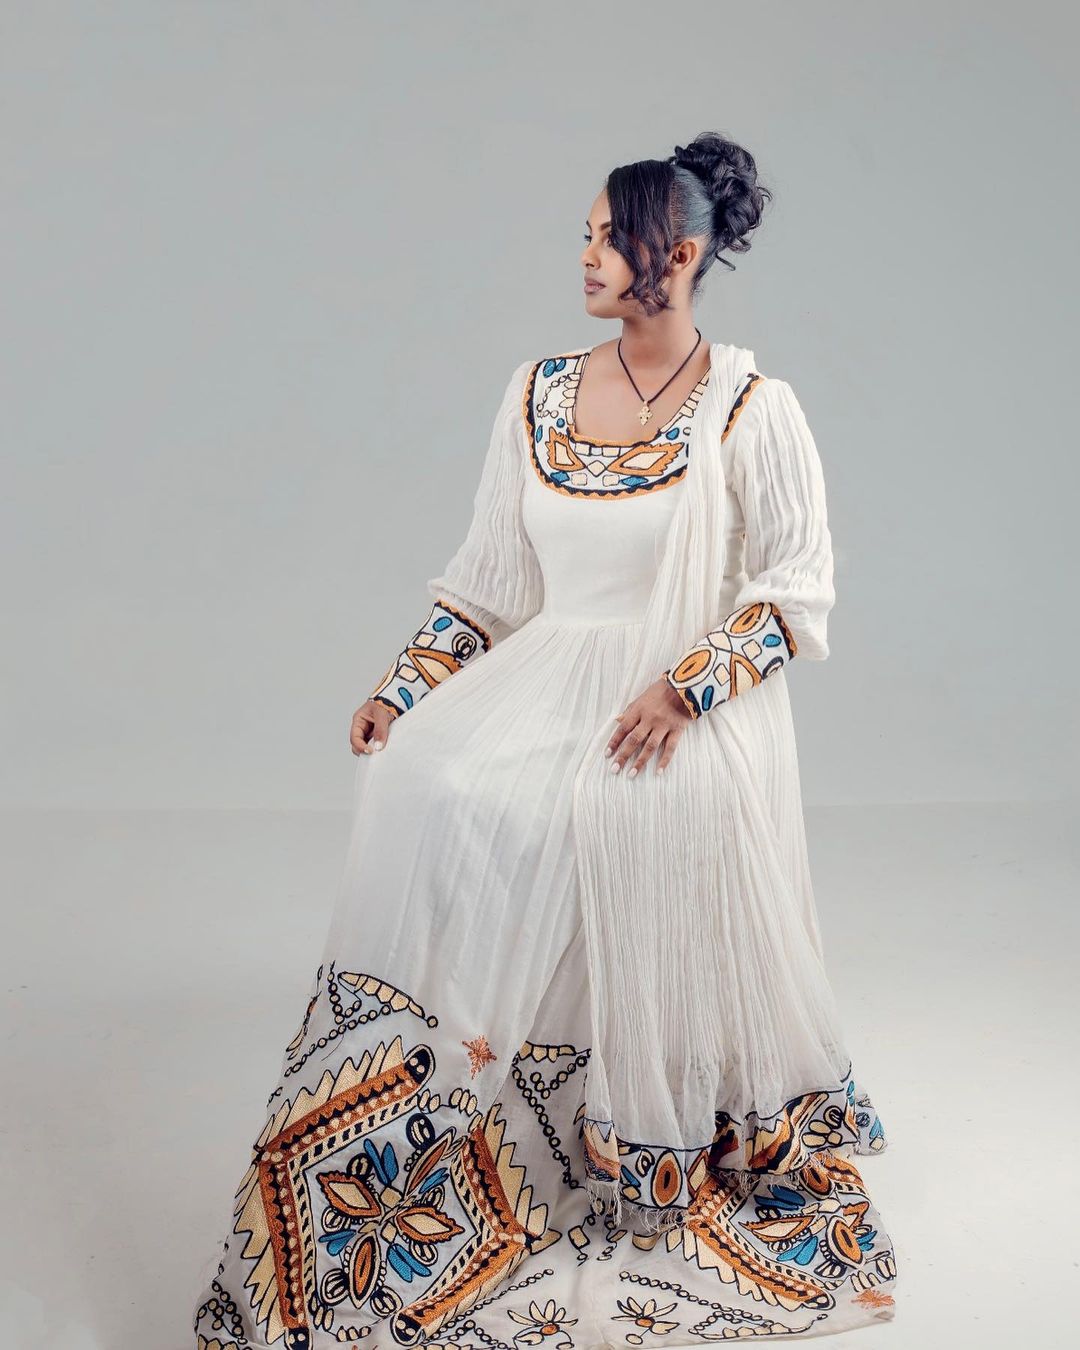 Adorn Yourself in Elegance Exquisite Habesha Dress for Every Occasion